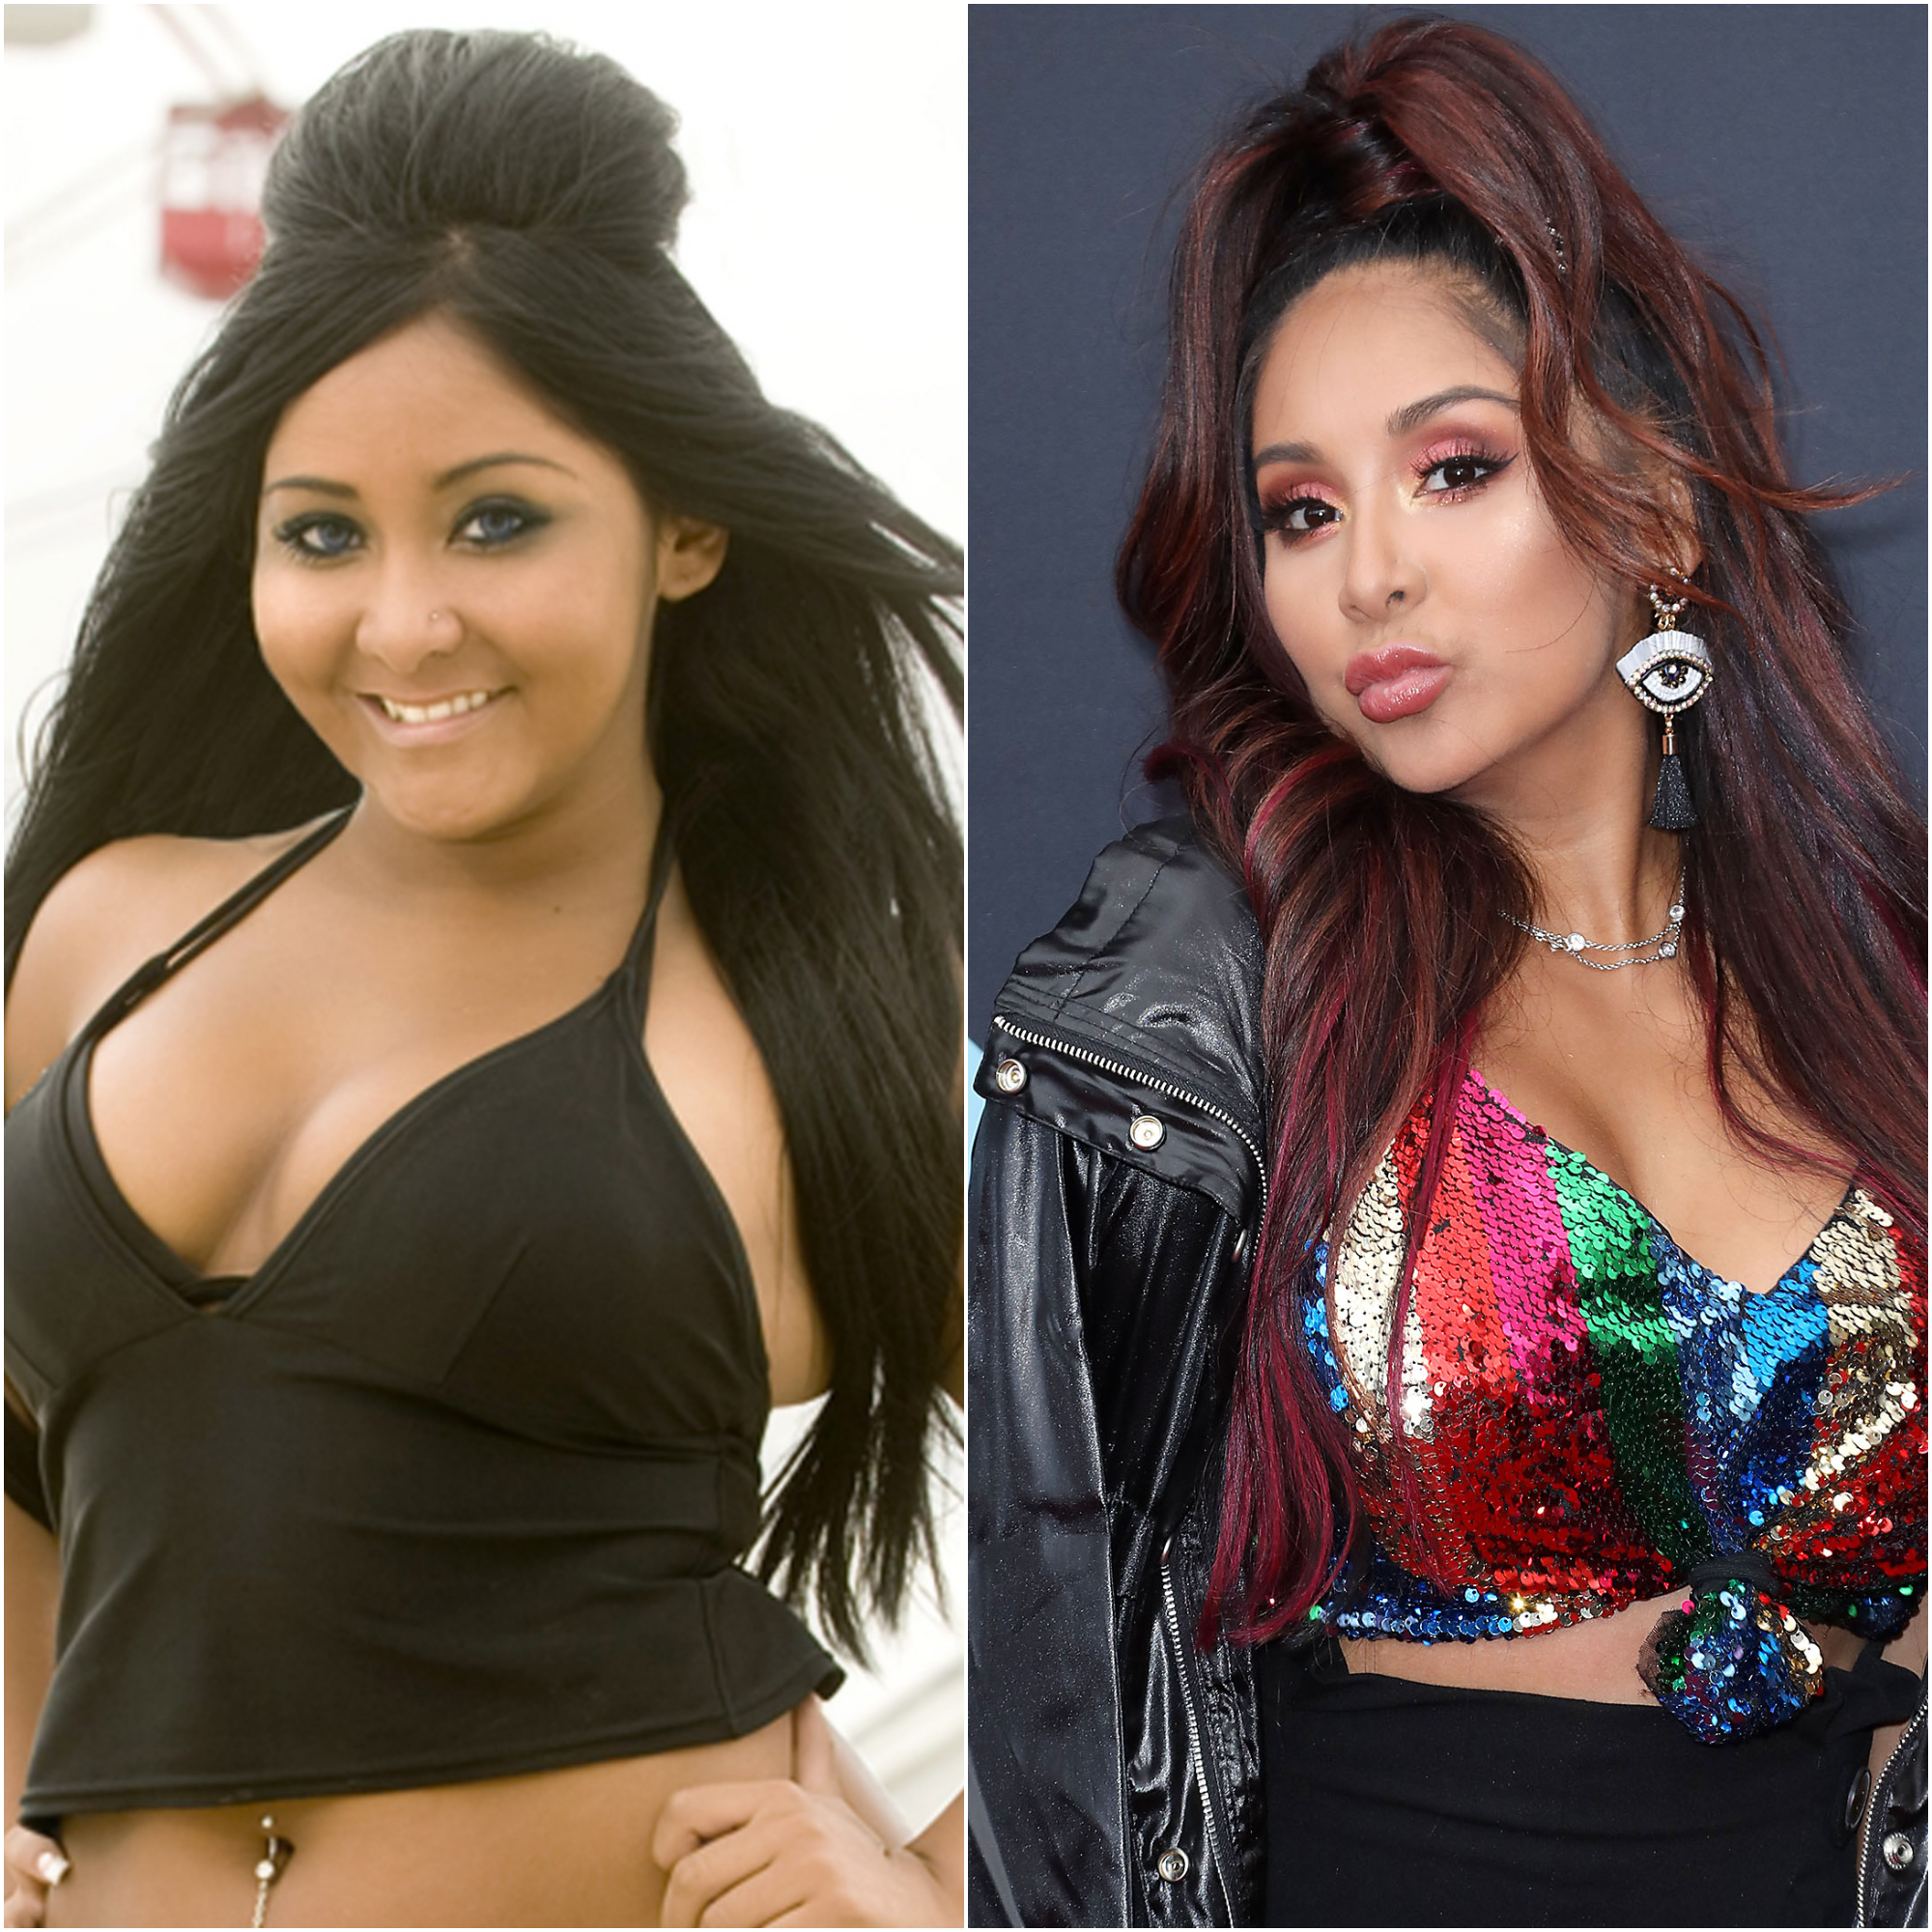 Nicole 'Snooki' Polizzi Gives More Details About Why She Is Not